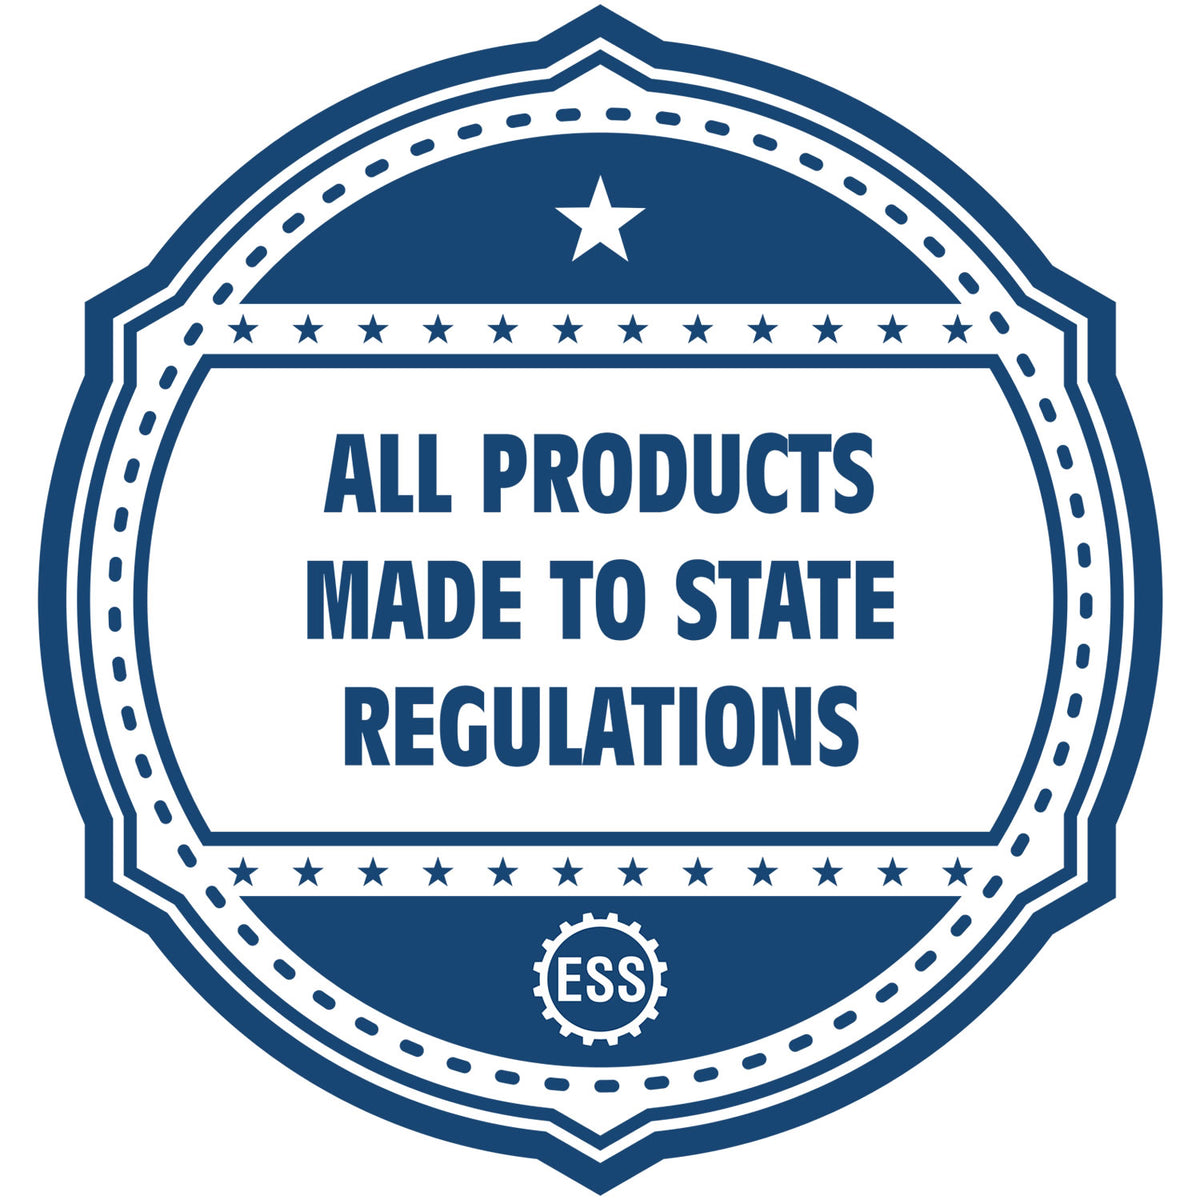 An icon or badge element for the Self-Inking Kansas Landscape Architect Stamp showing that this product is made in compliance with state regulations.